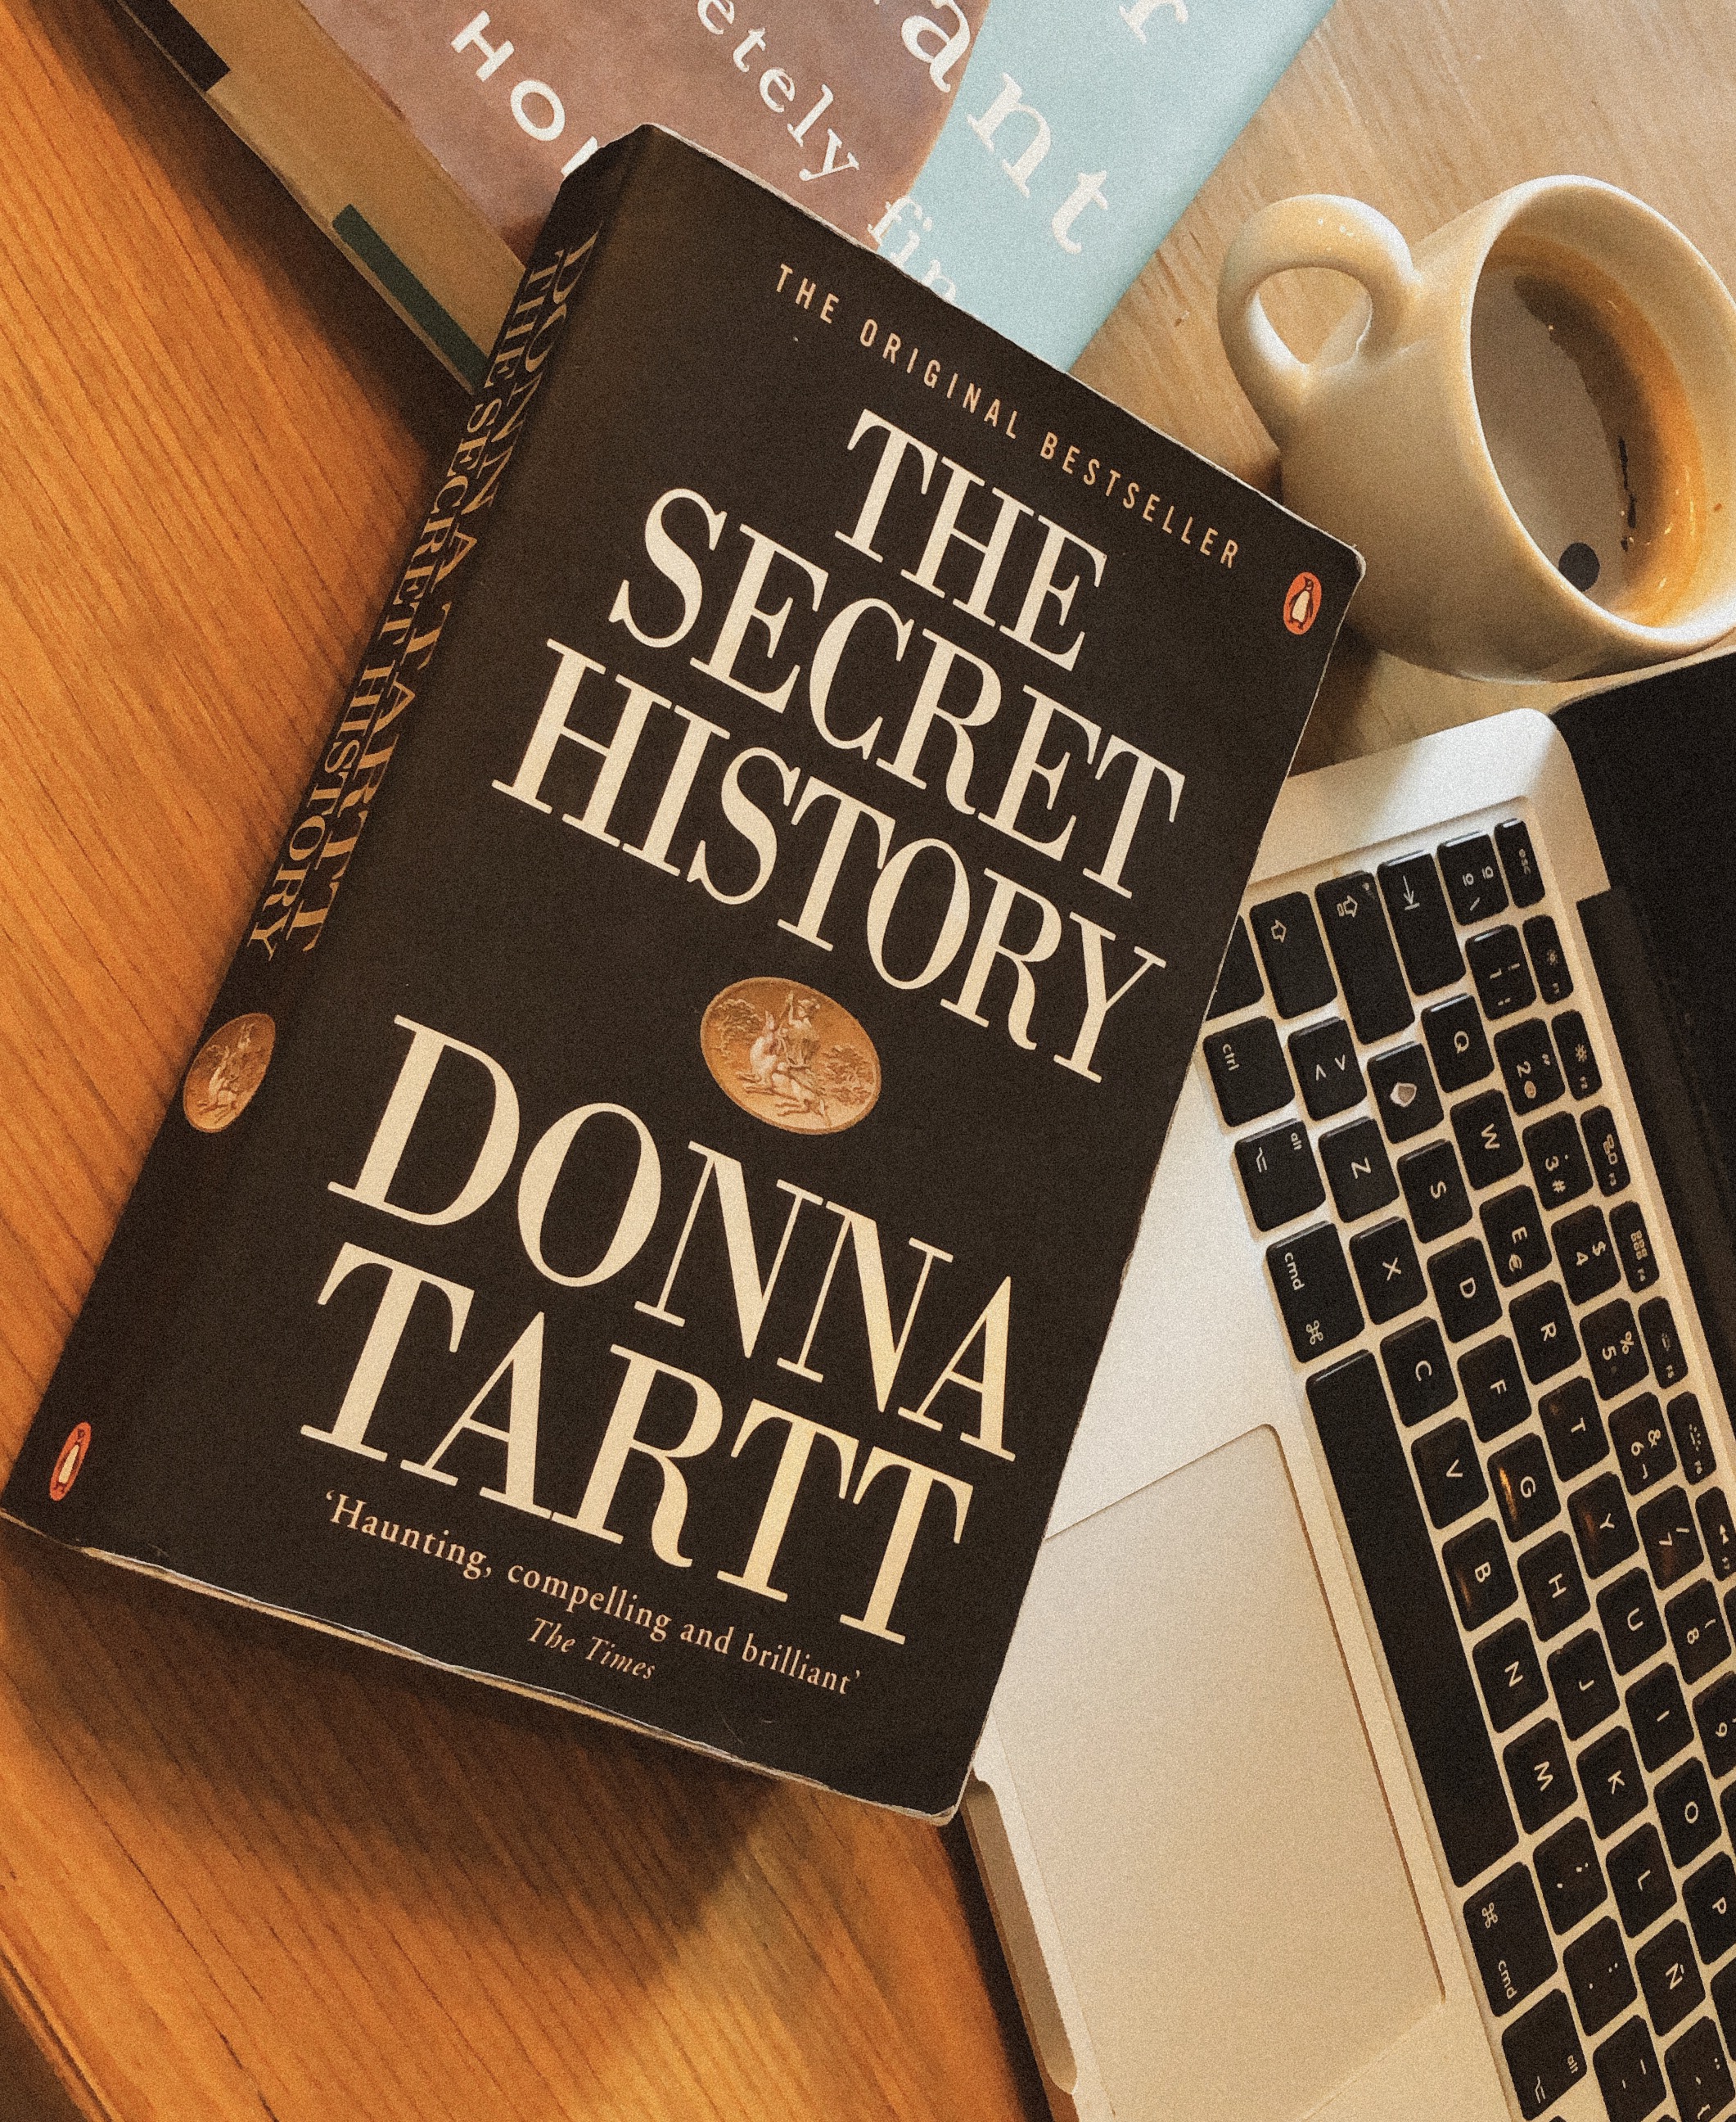 The Cult of Donna Tartt — The Airship